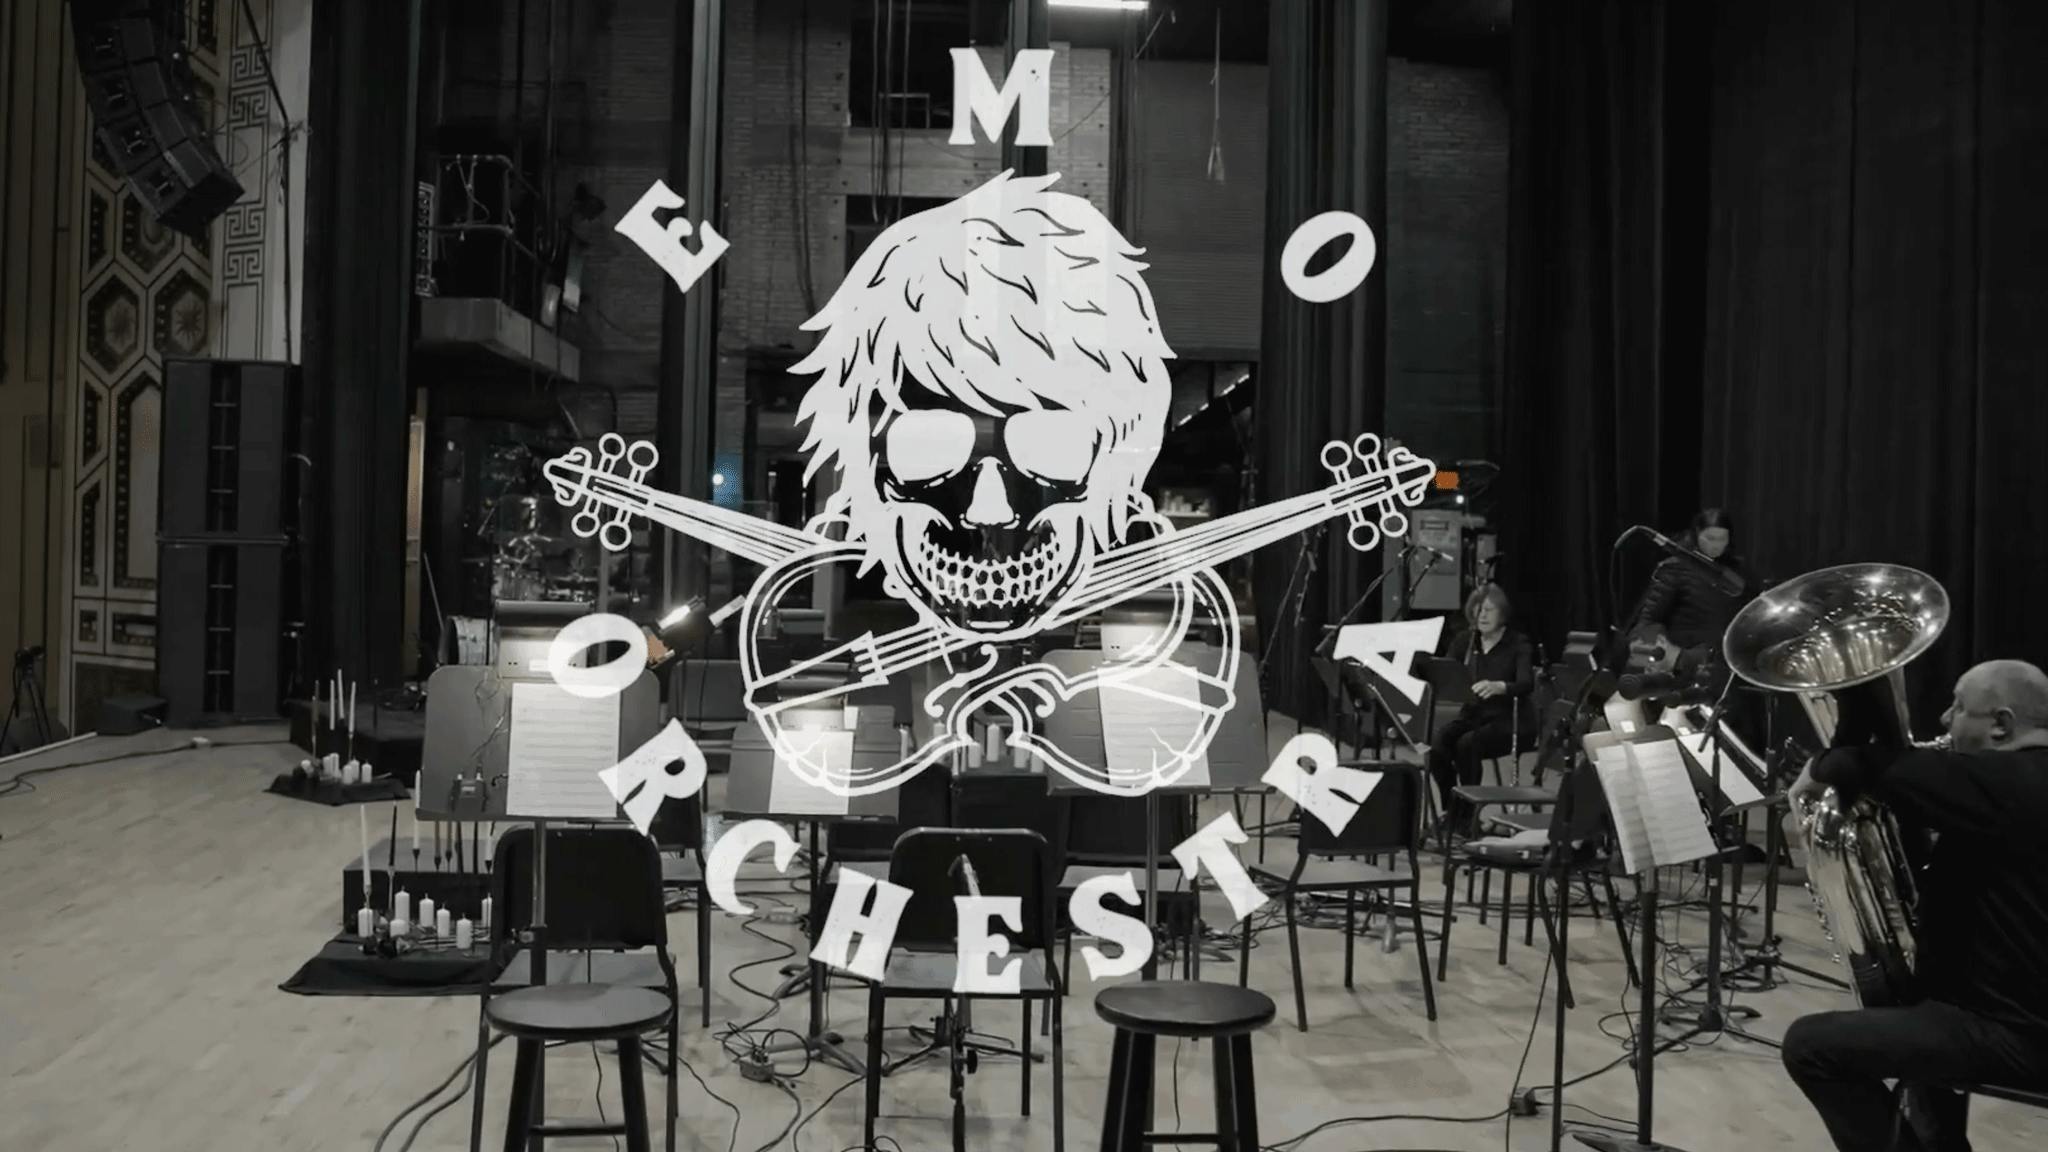 An emo orchestra is going on tour: “For emo lovers and orchestra aficionados alike”